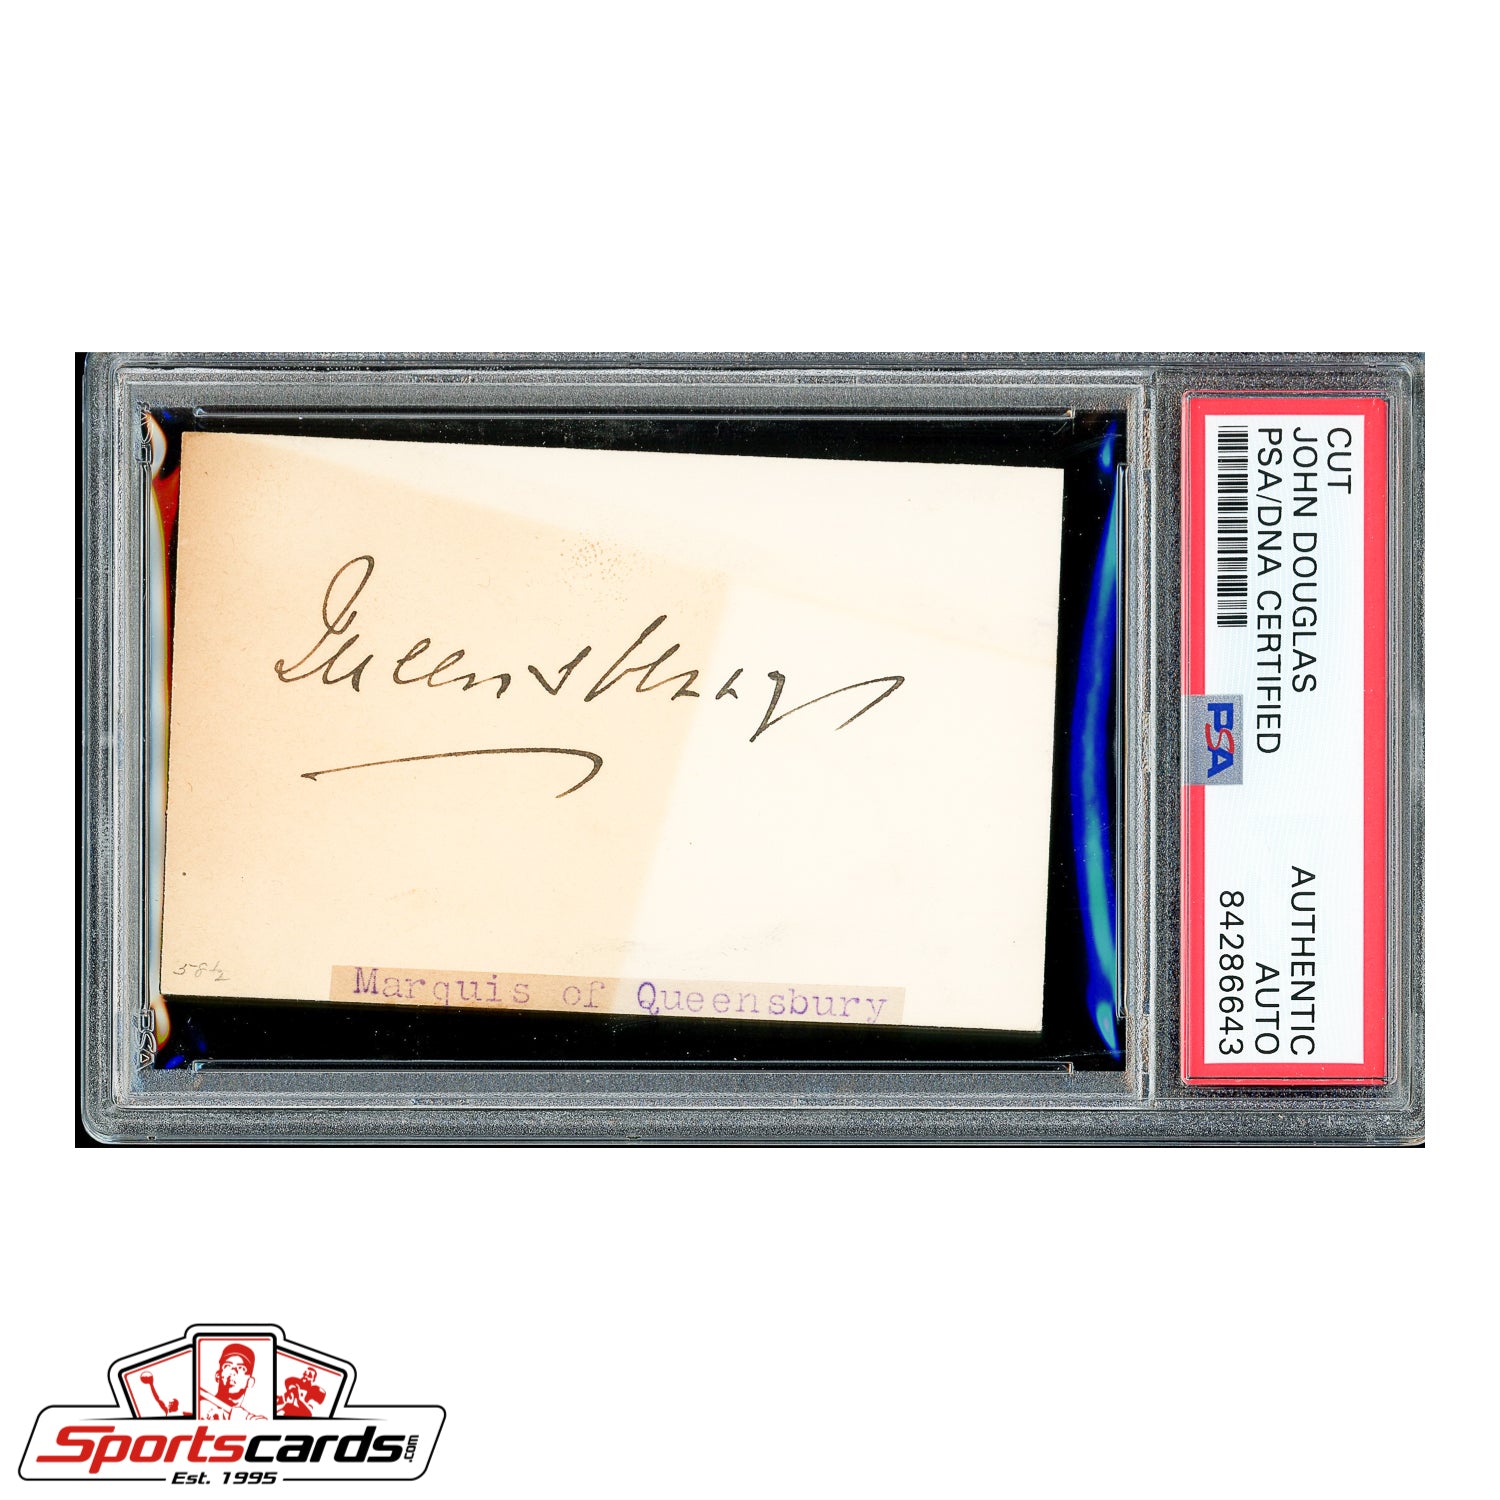 Boxing Pioneer John Douglas (Queesberry Rules) Signed Autographed Card - PSA/DNA